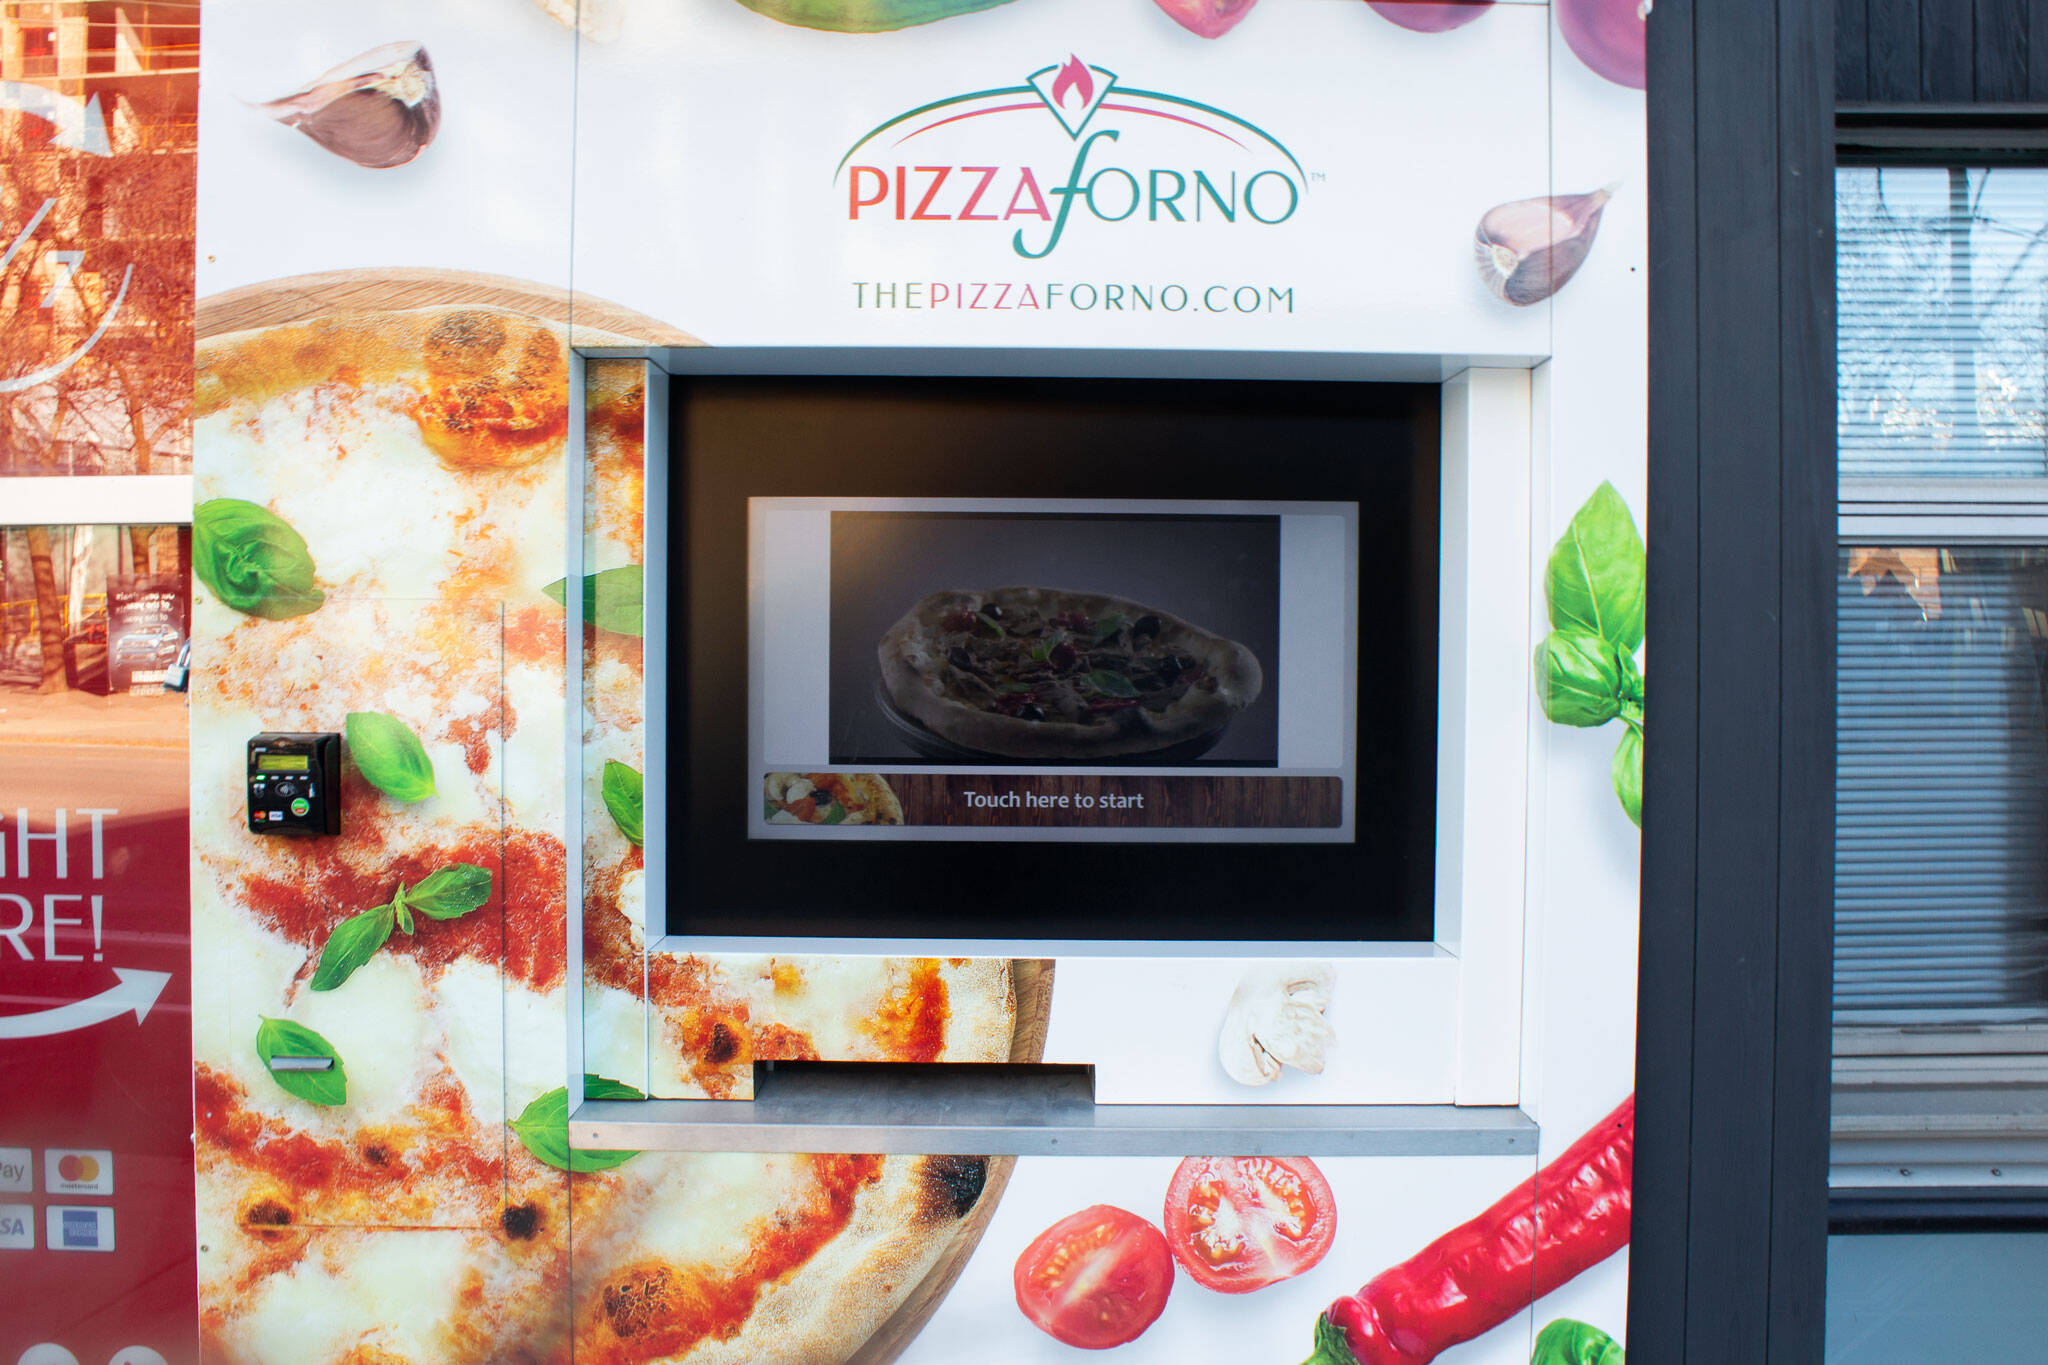 Toronto's newest pizza joint is a computer screen